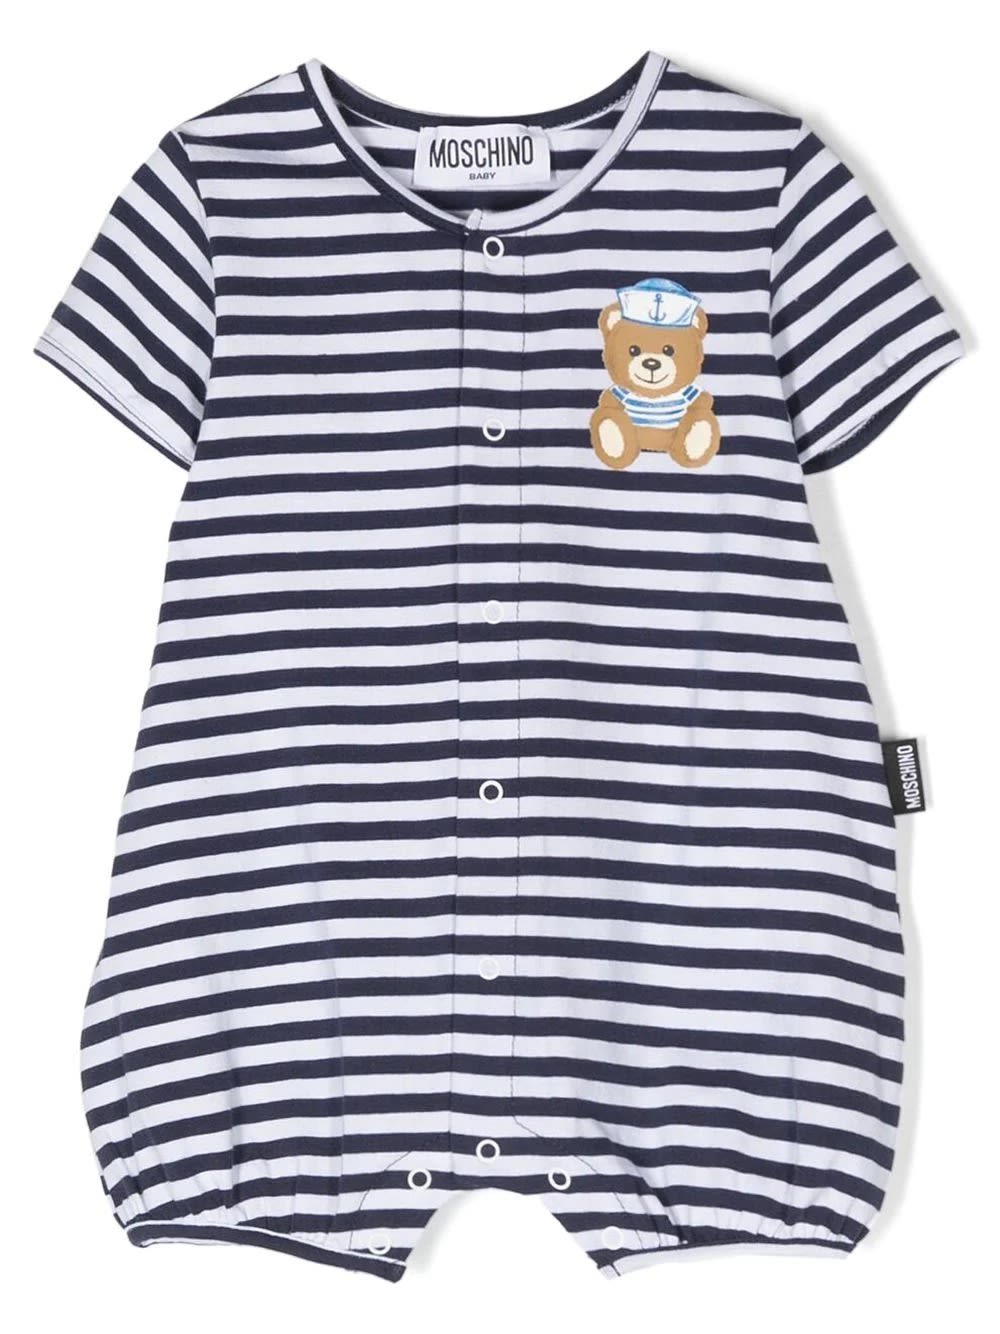 MOSCHINO BLUE STRIPED SHORT PLAYSUIT WITH SAILOR TEDDY BEAR